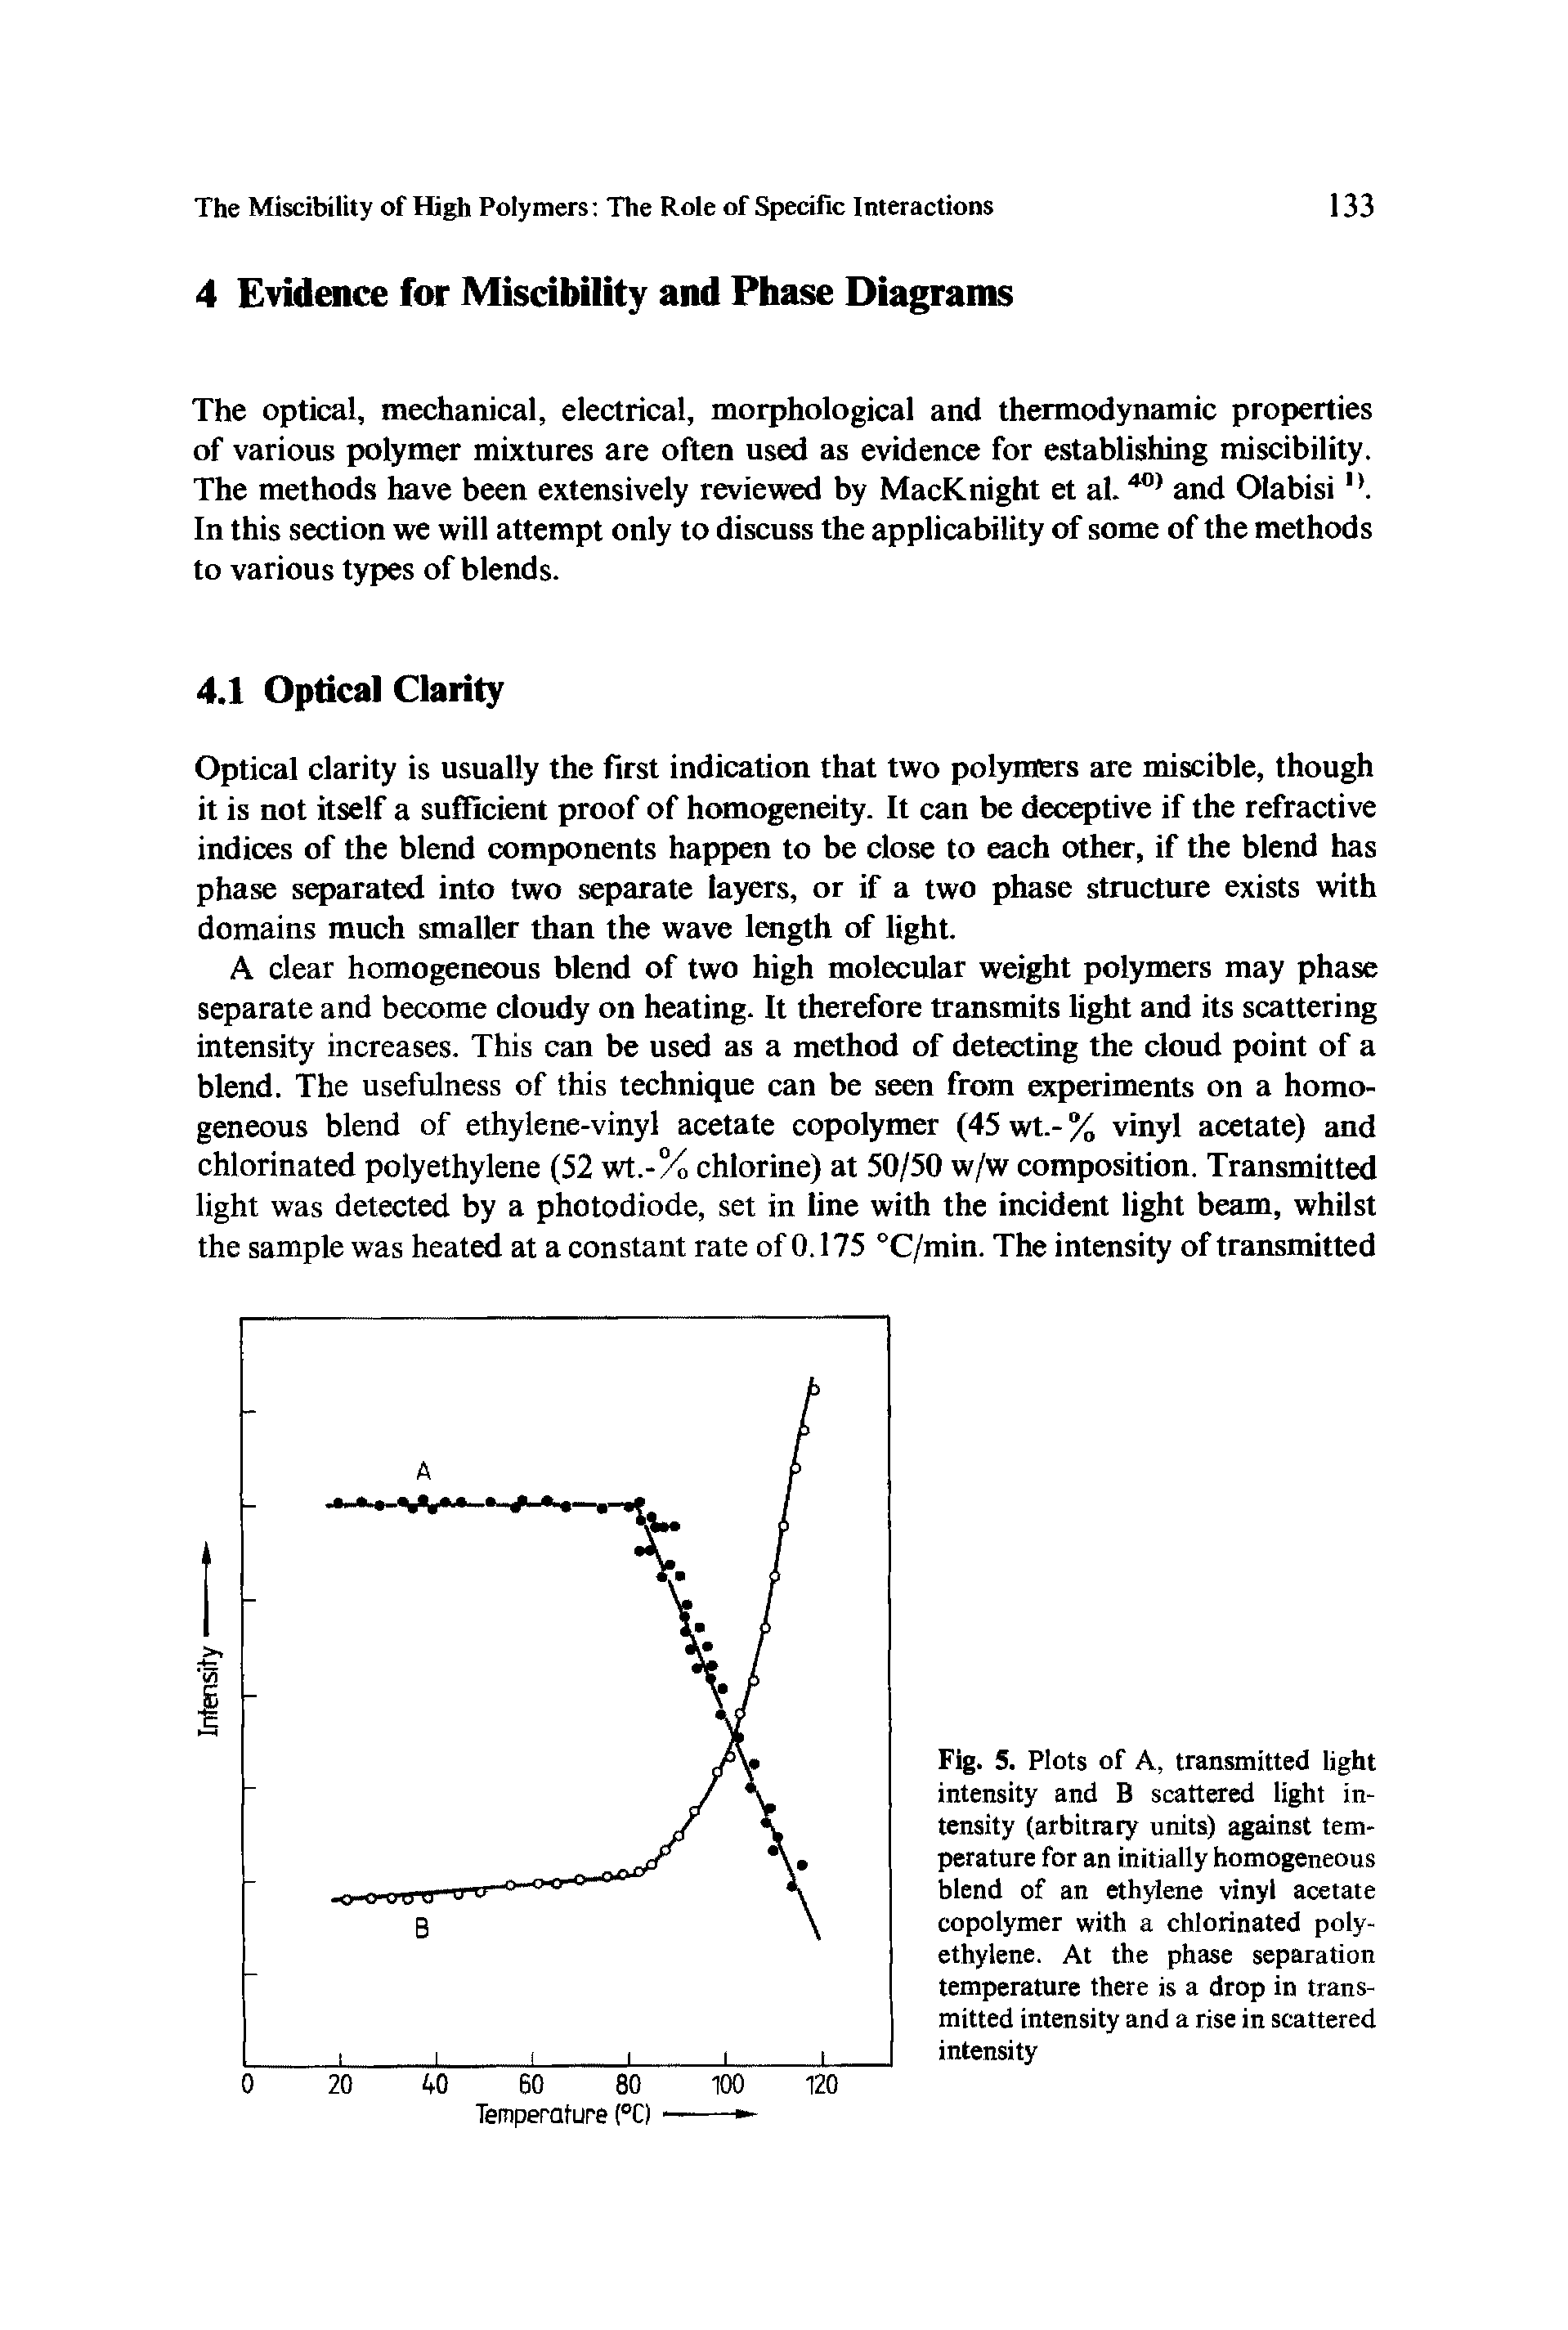 Fig. 5. Plots of A, transmitted light intensity and B scattered light intensity (arbitrary units) against temperature for an initially homogeneous blend of an ethylene vinyl acetate copolymer with a chlorinated polyethylene. At the phase separation temperature there is a drop in transmitted intensity and a rise in scattered intensity...